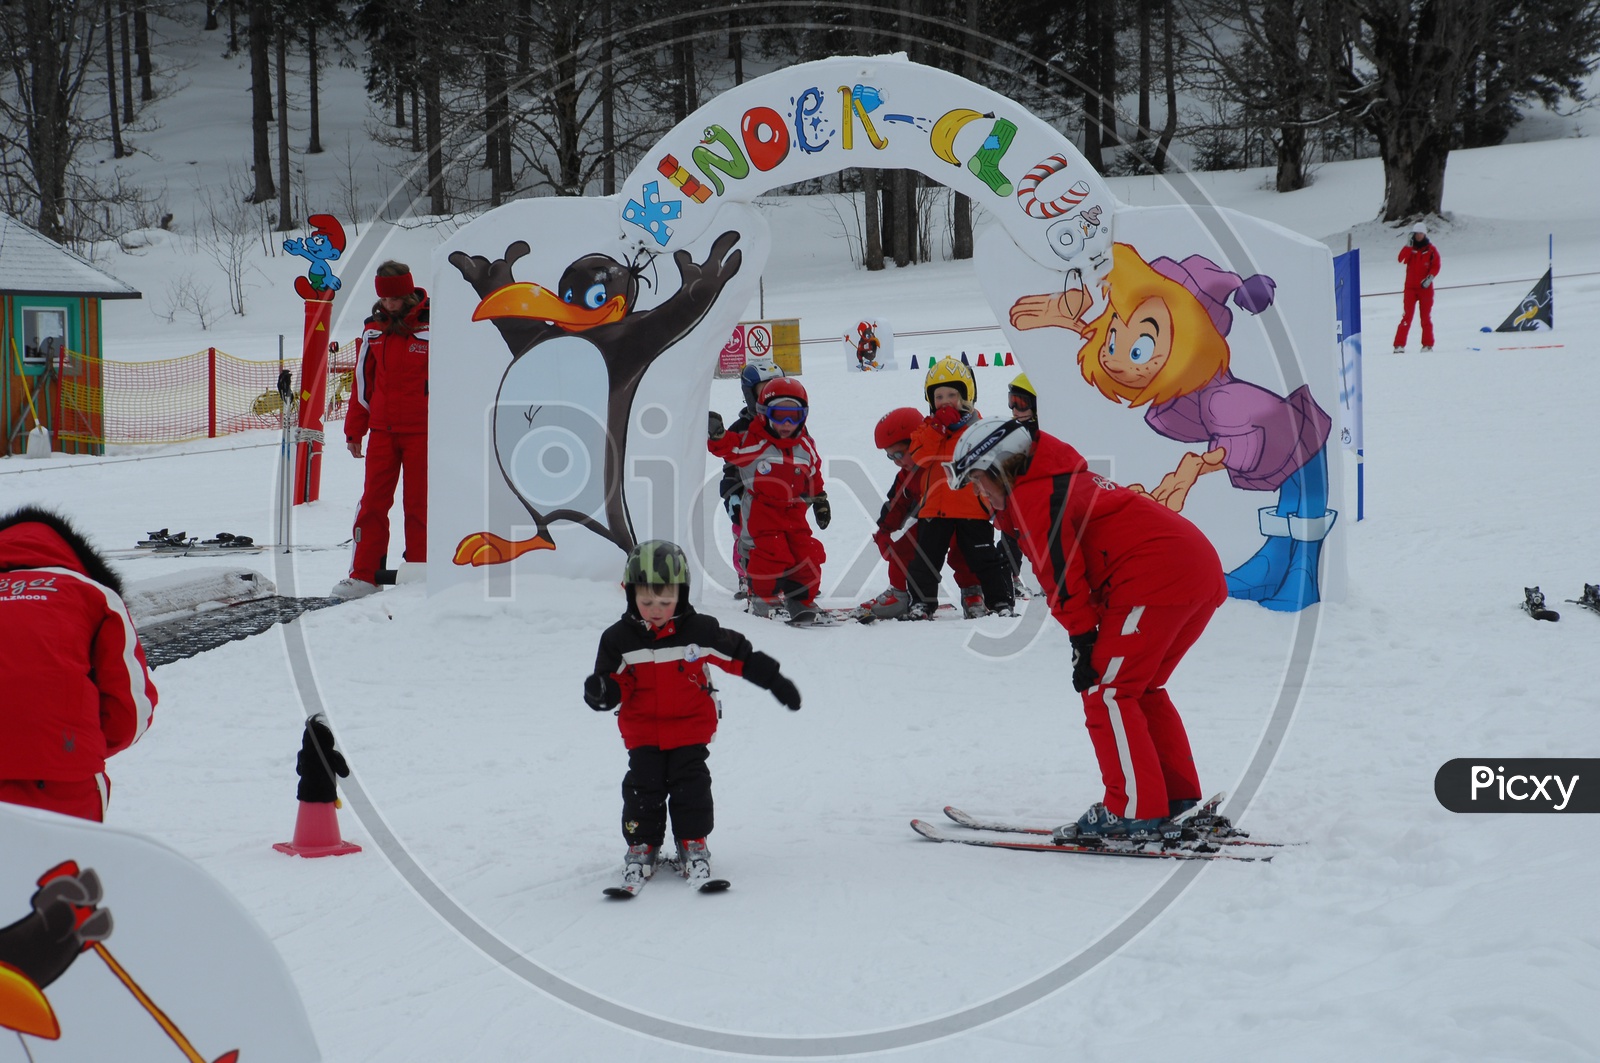 Kids Learning The Snow Skiing  in Kinder Club in Snow Of Swiss